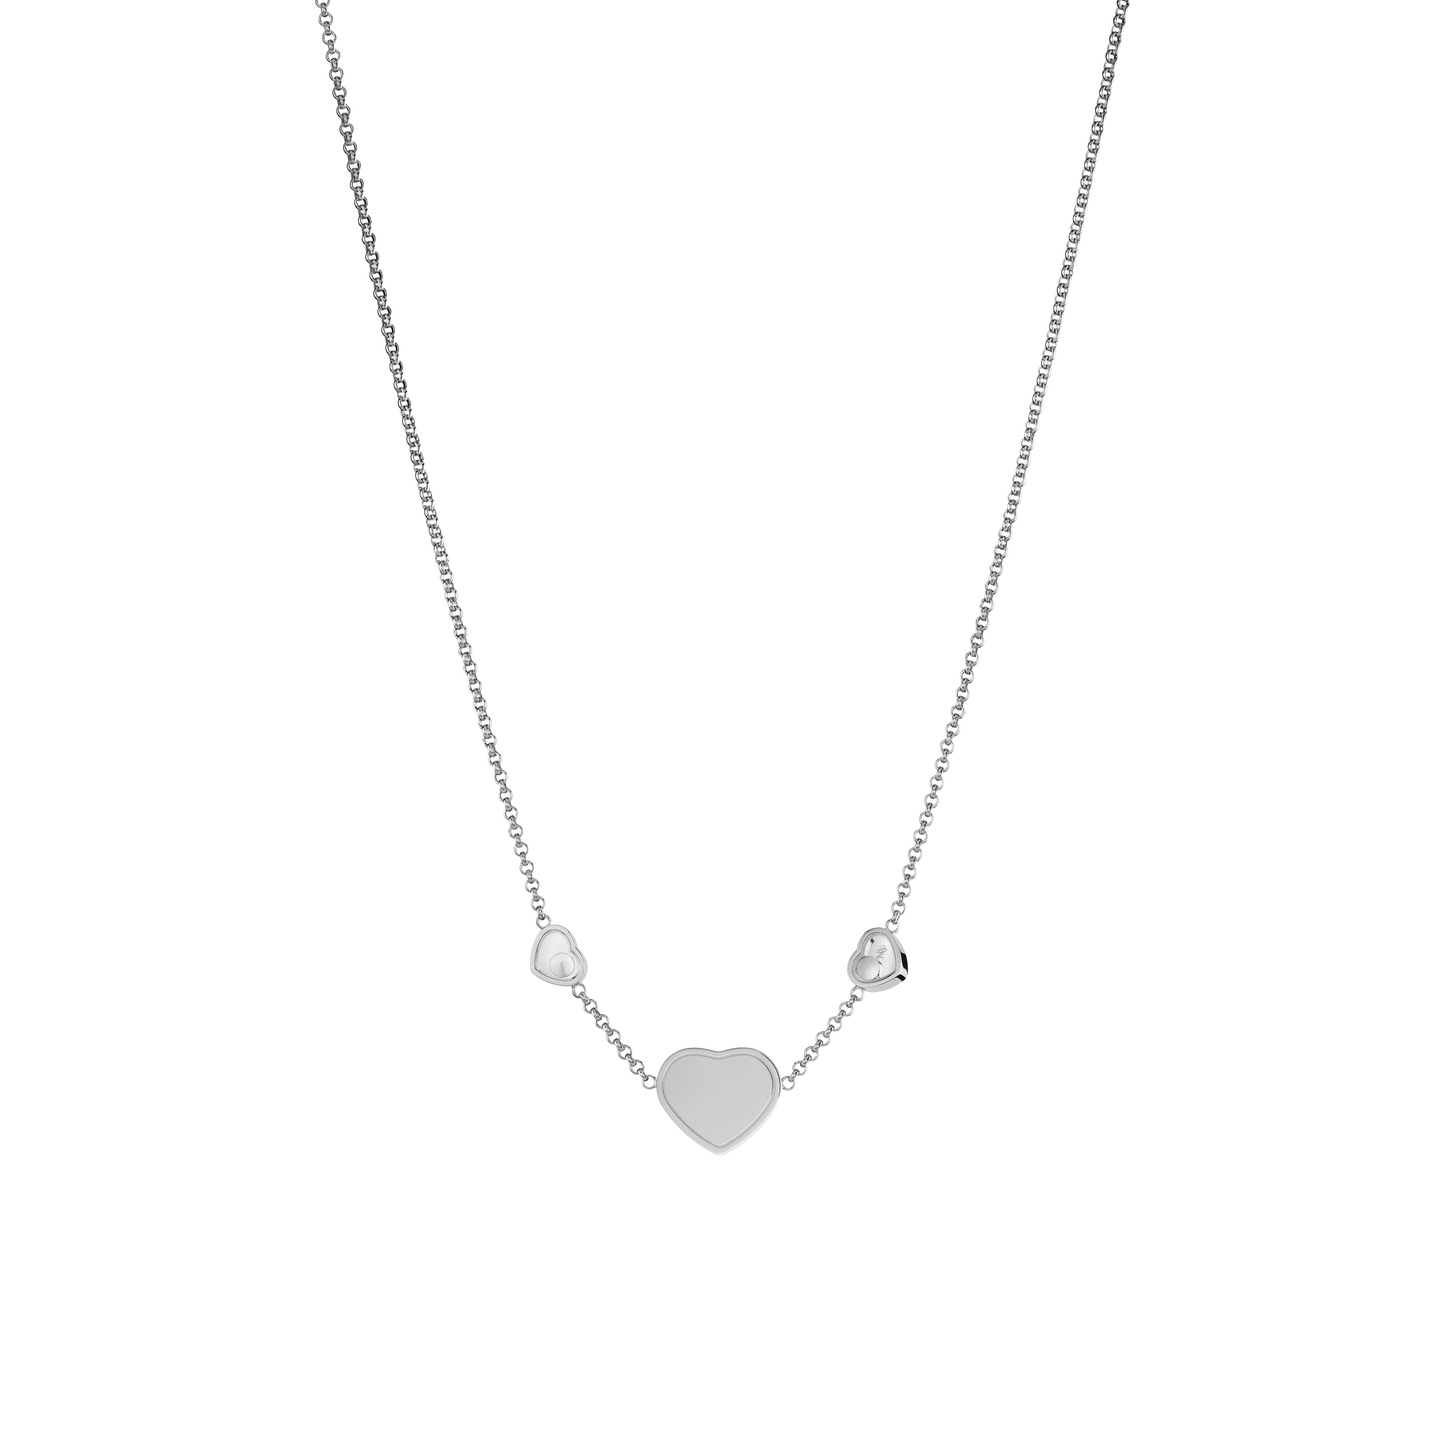 HAPPY HEARTS NECKLACE, ETHICAL WHITE GOLD, DIAMONDS 81A082-1009